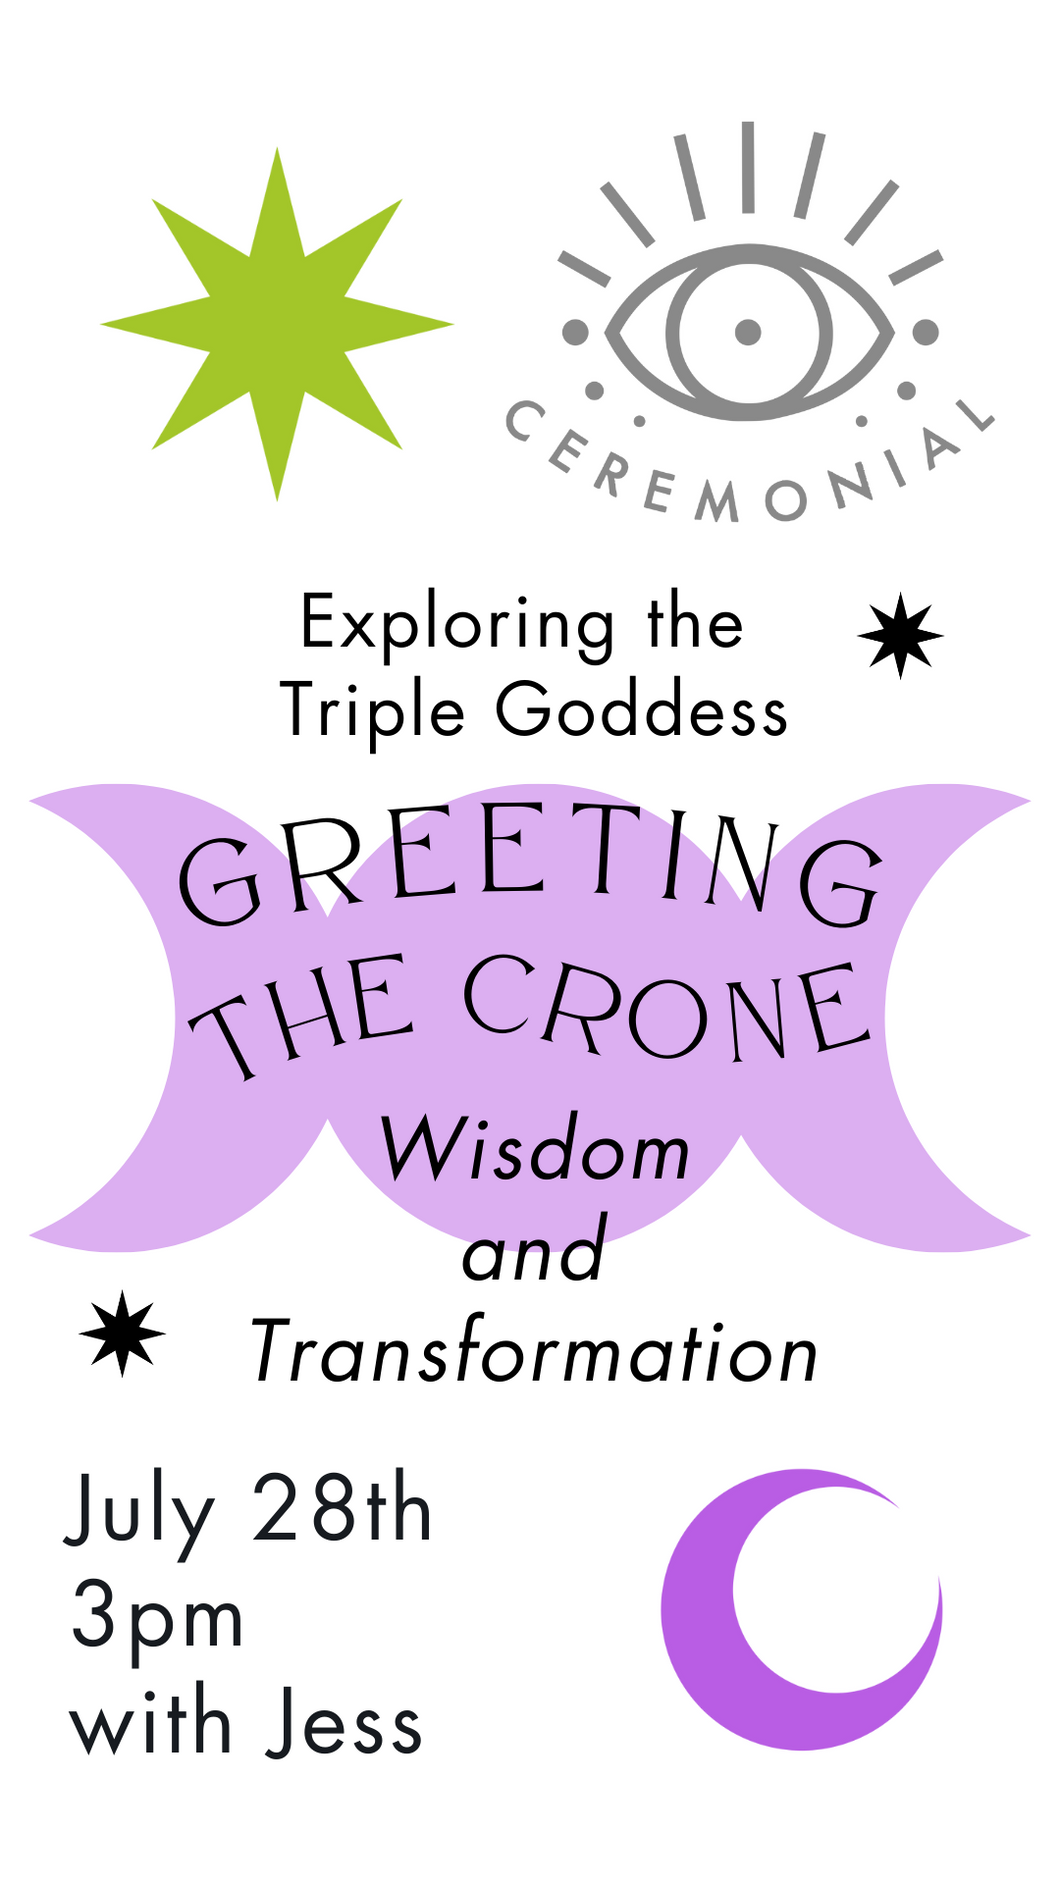 Exploring the Triple Goddess - Class Three : Greeting the Crone- Wisdom and Transformation, led by Jess~ Sunday, July 28th 3pm